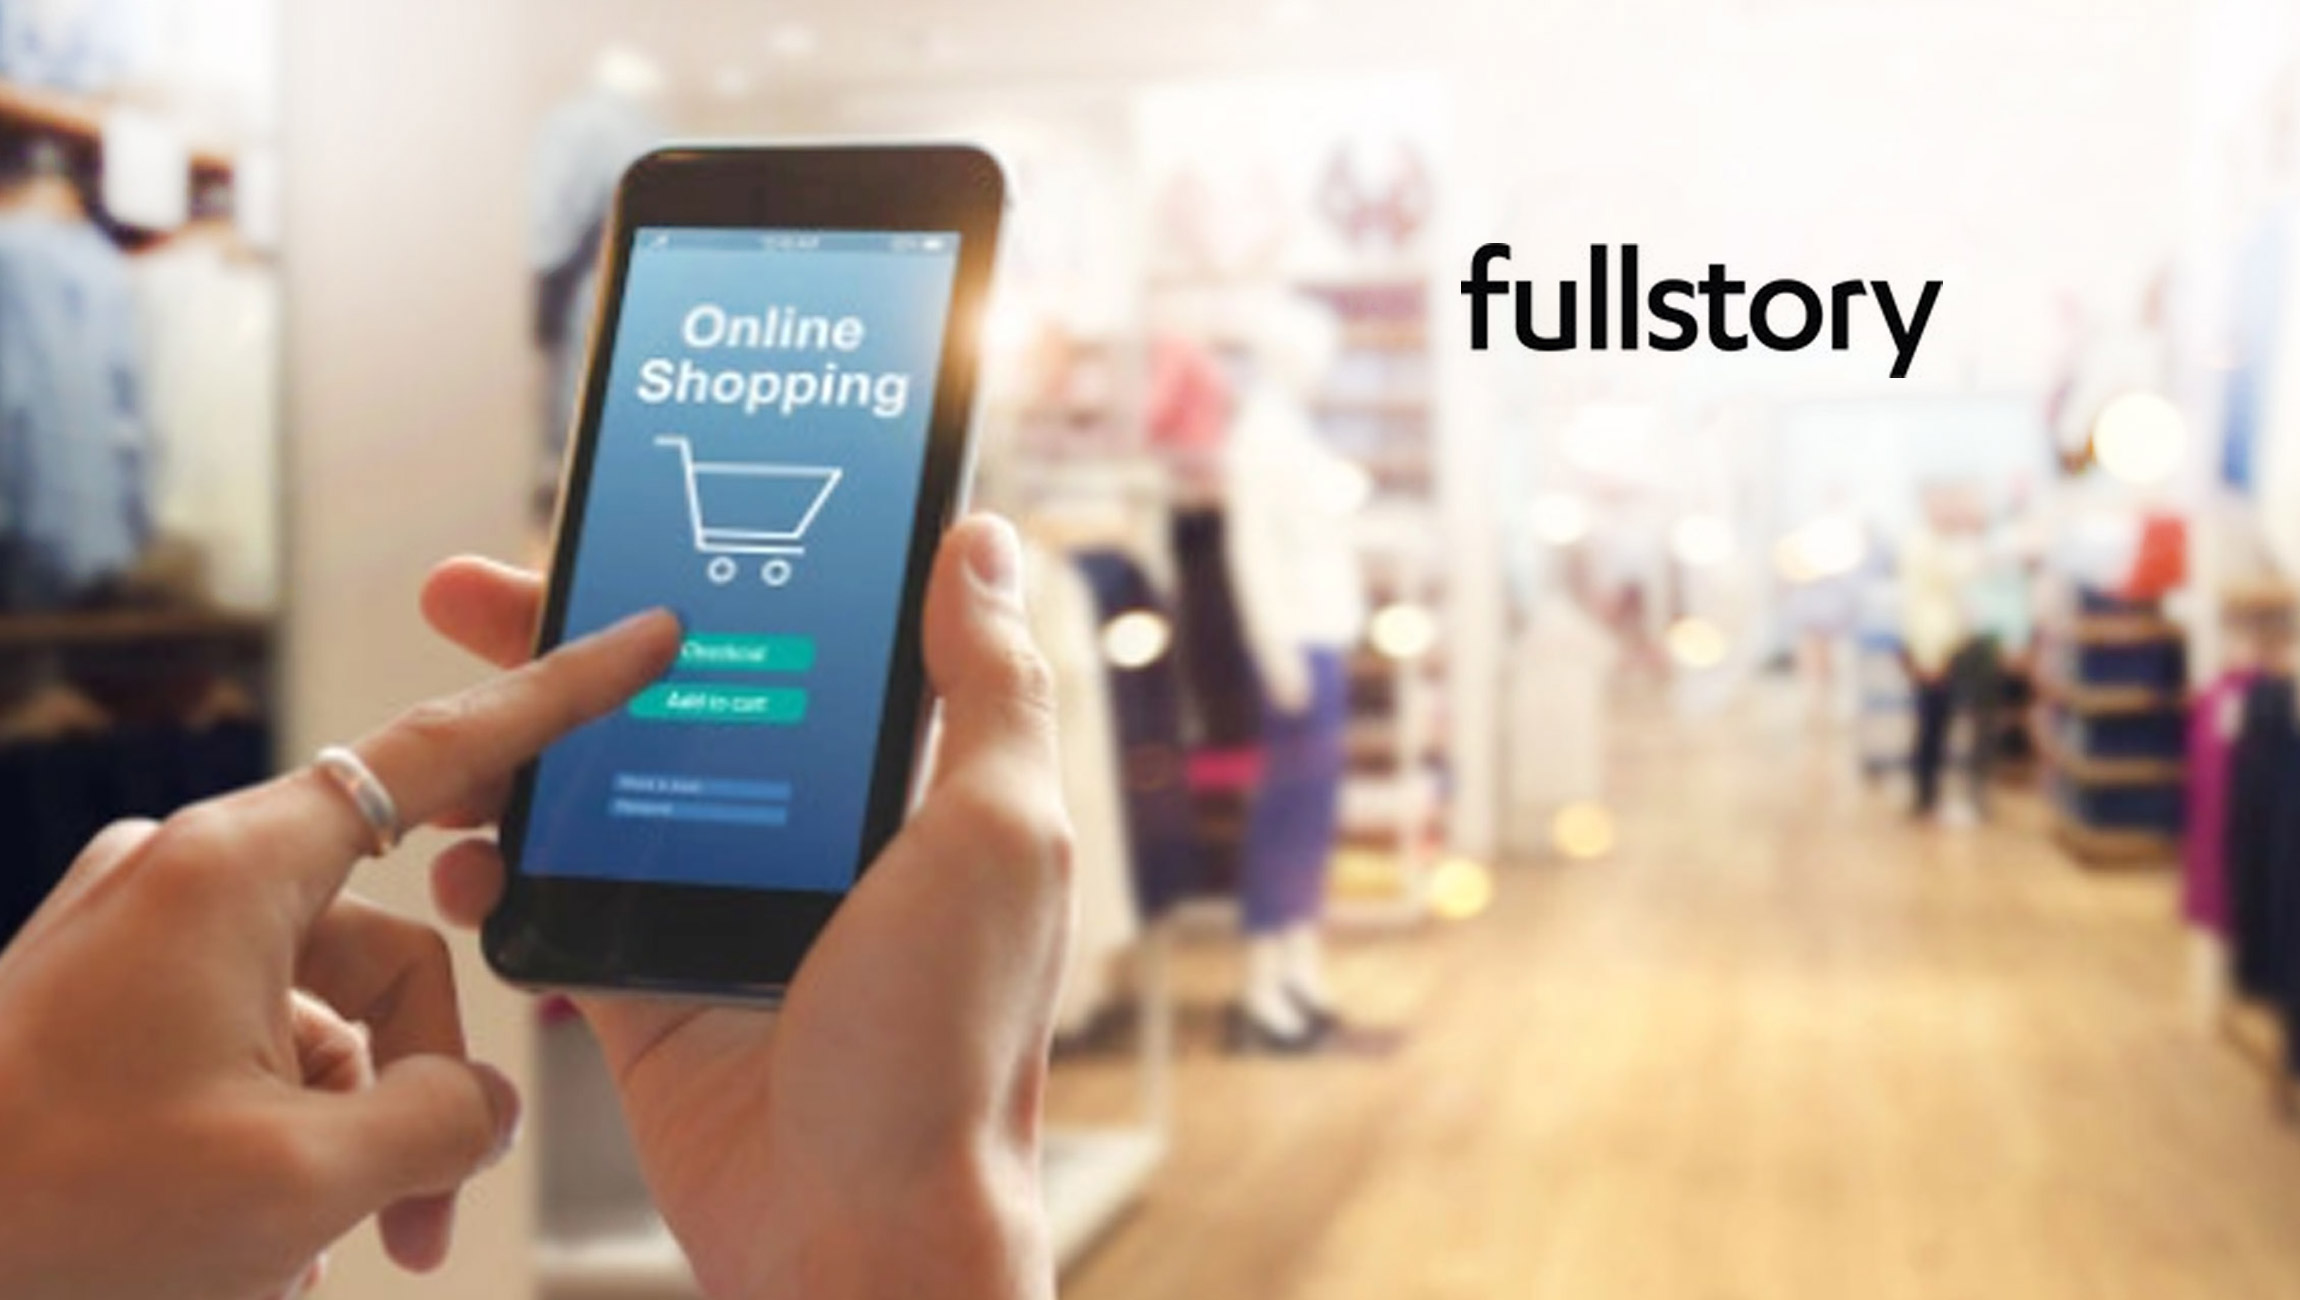 New FullStory Survey Illuminates the Role of Digital Shopping Amidst Holiday Shortages and Delays